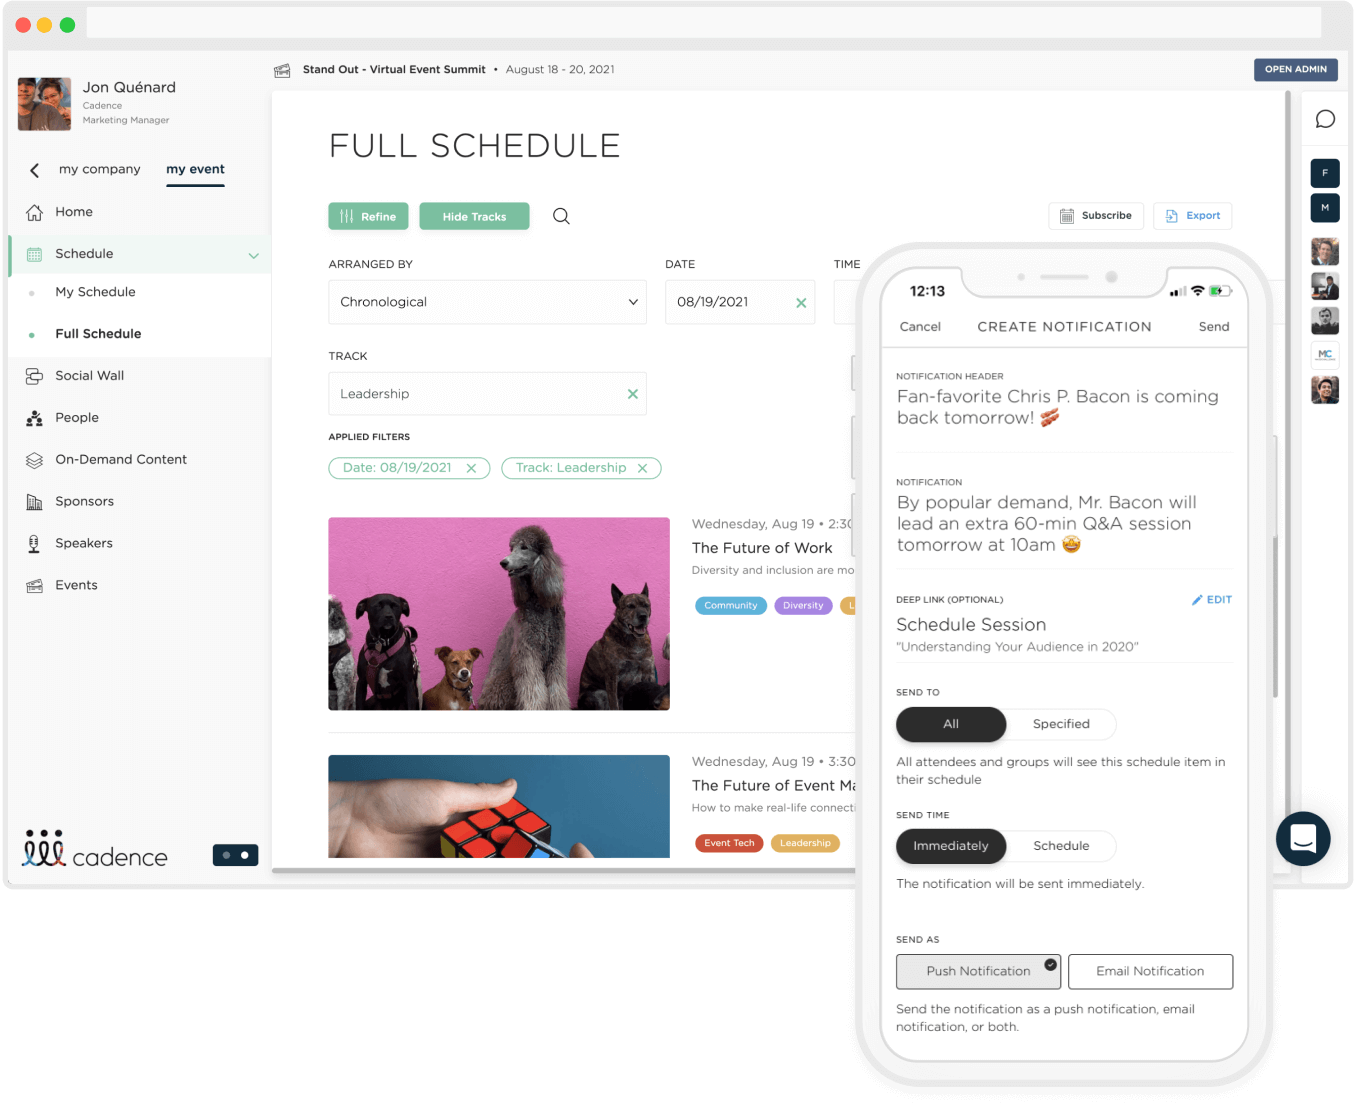 Tell the story of your event in a Schedule tailored to each individual, group, or session. Easily manage it from mobile and web.